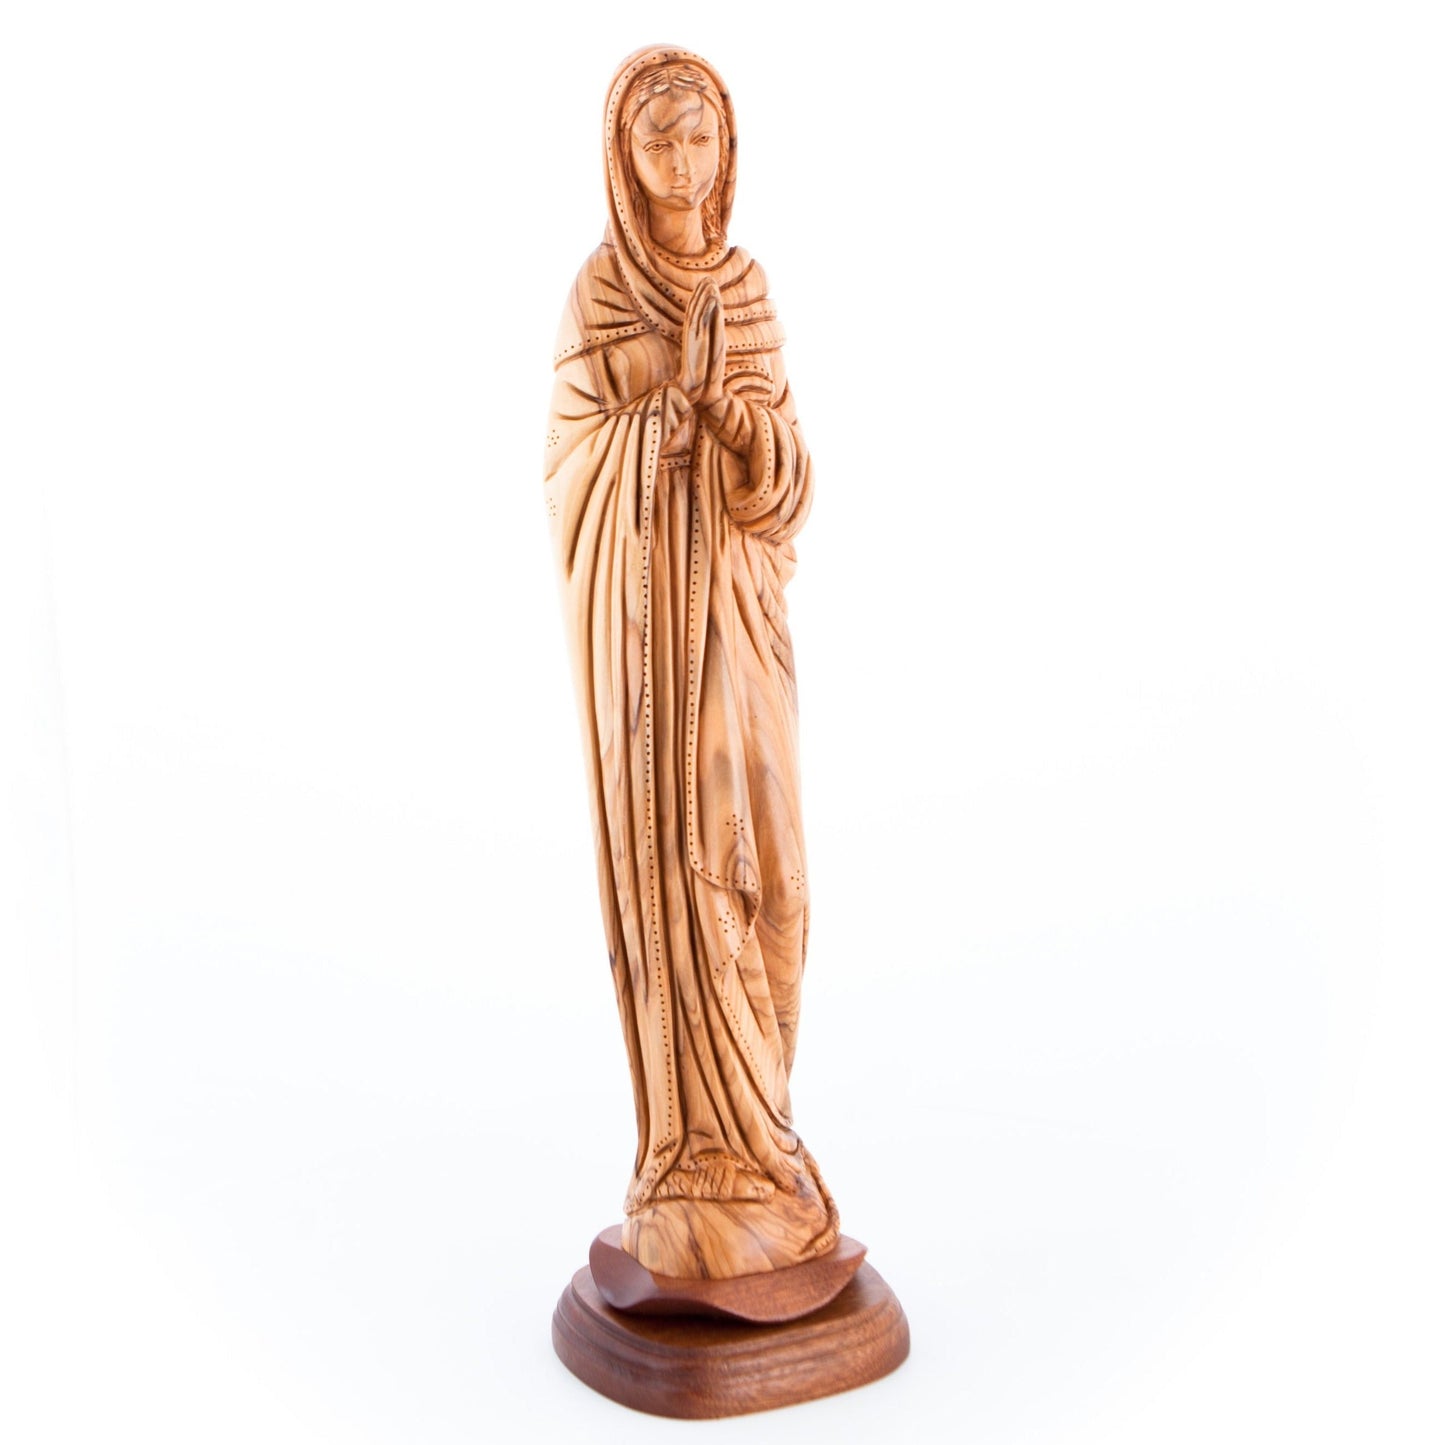 Praying Virgin Mary, 15.7" Olive Wood Carving from Bethlehem